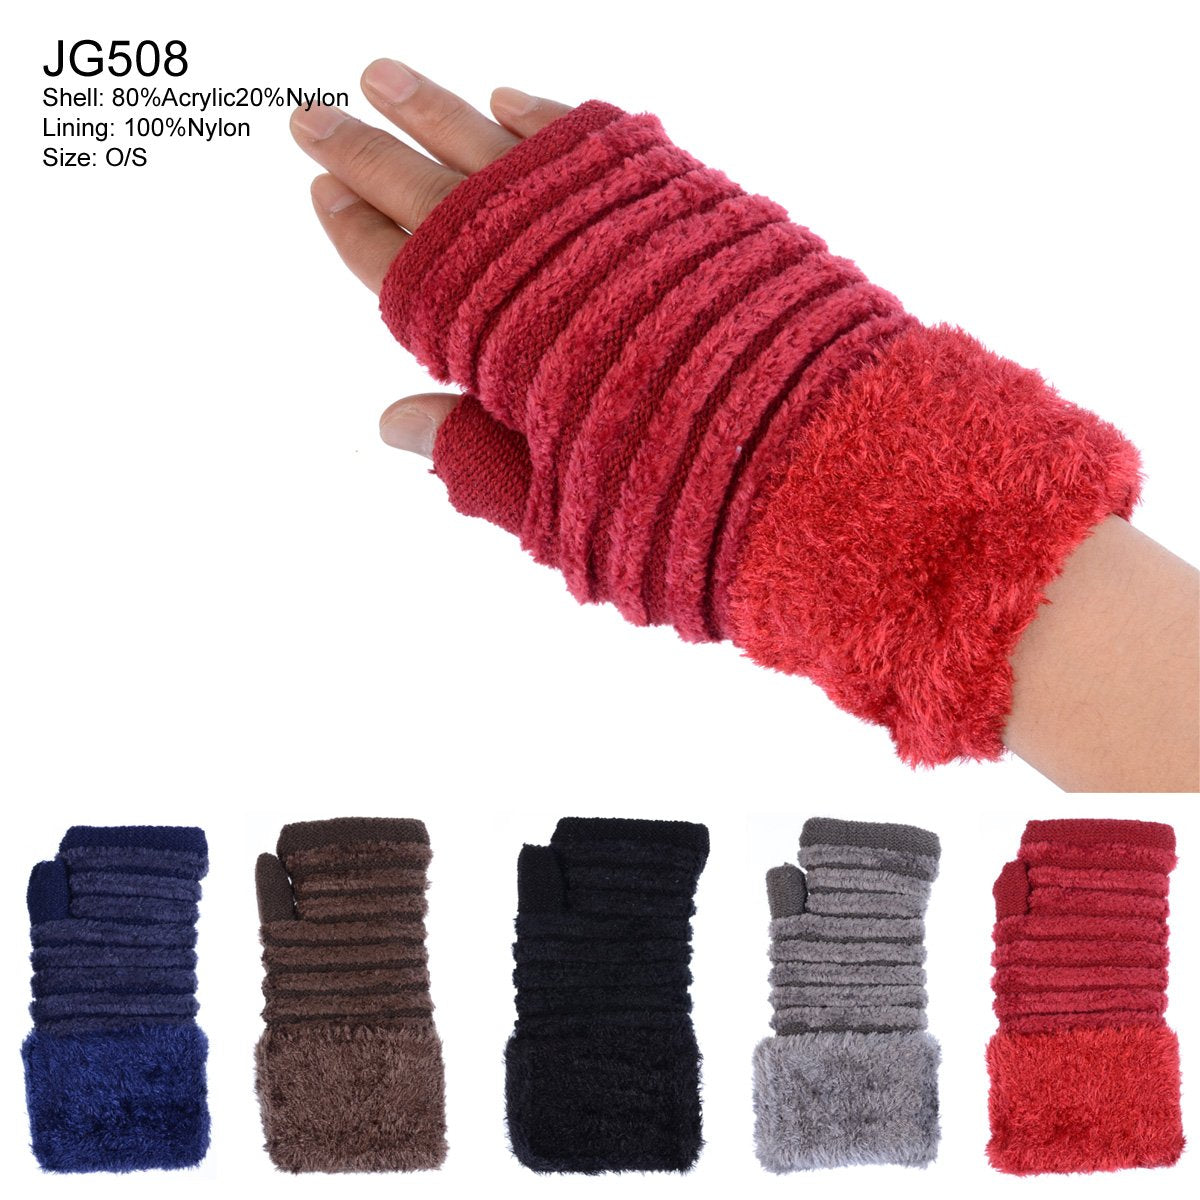 Solid Color Fingerless Gloves W/ Cuffs & Chenille Lining - 12Pc Set